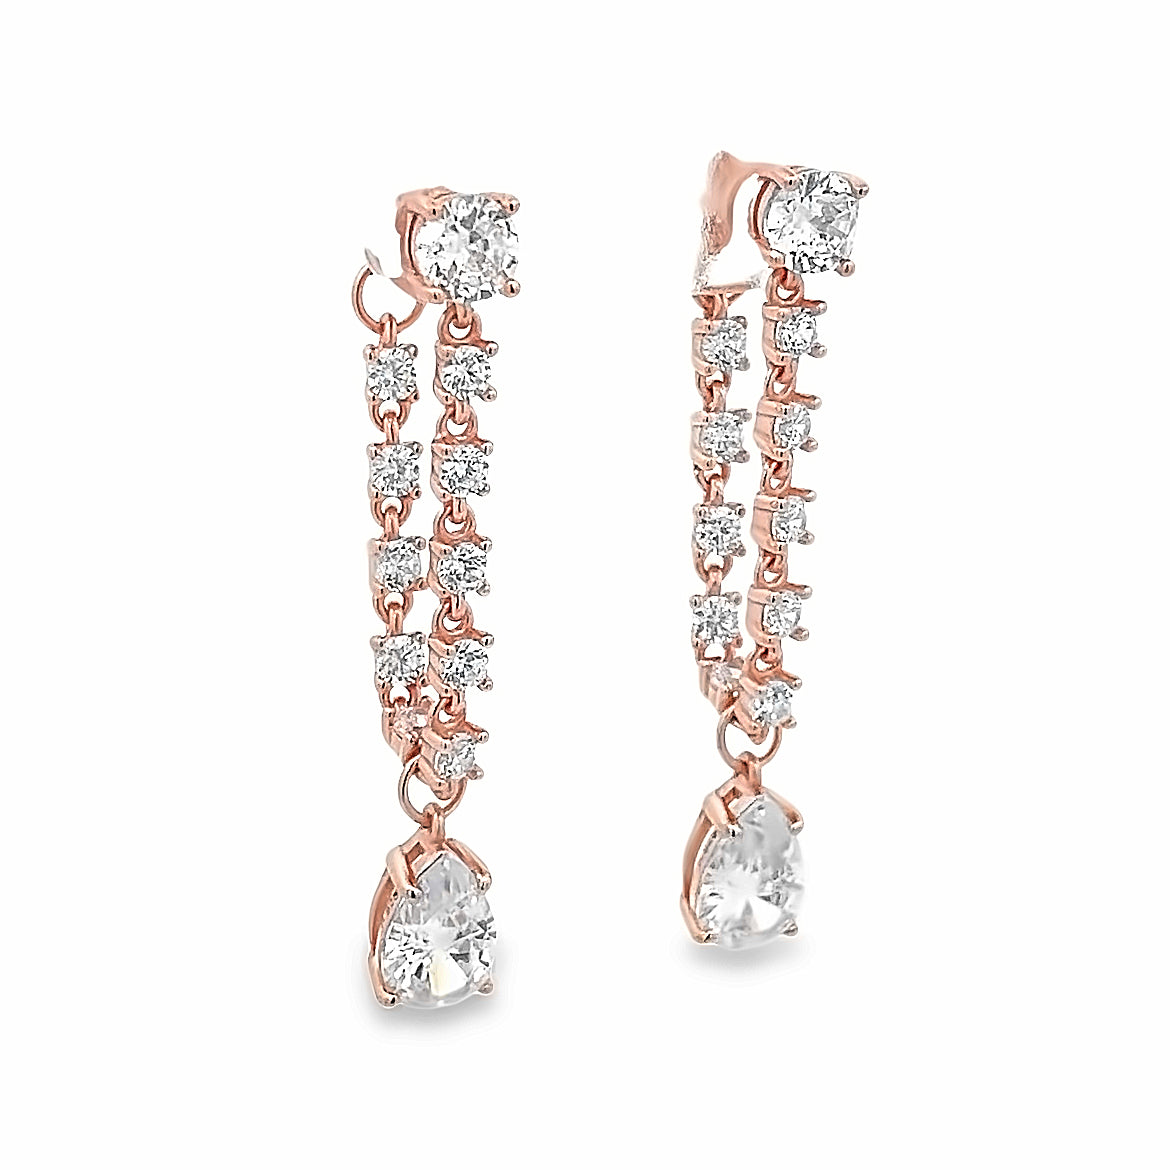 925 SILVER ROSE GOLD DANGLING EARRINGS WITH CRYSTALS